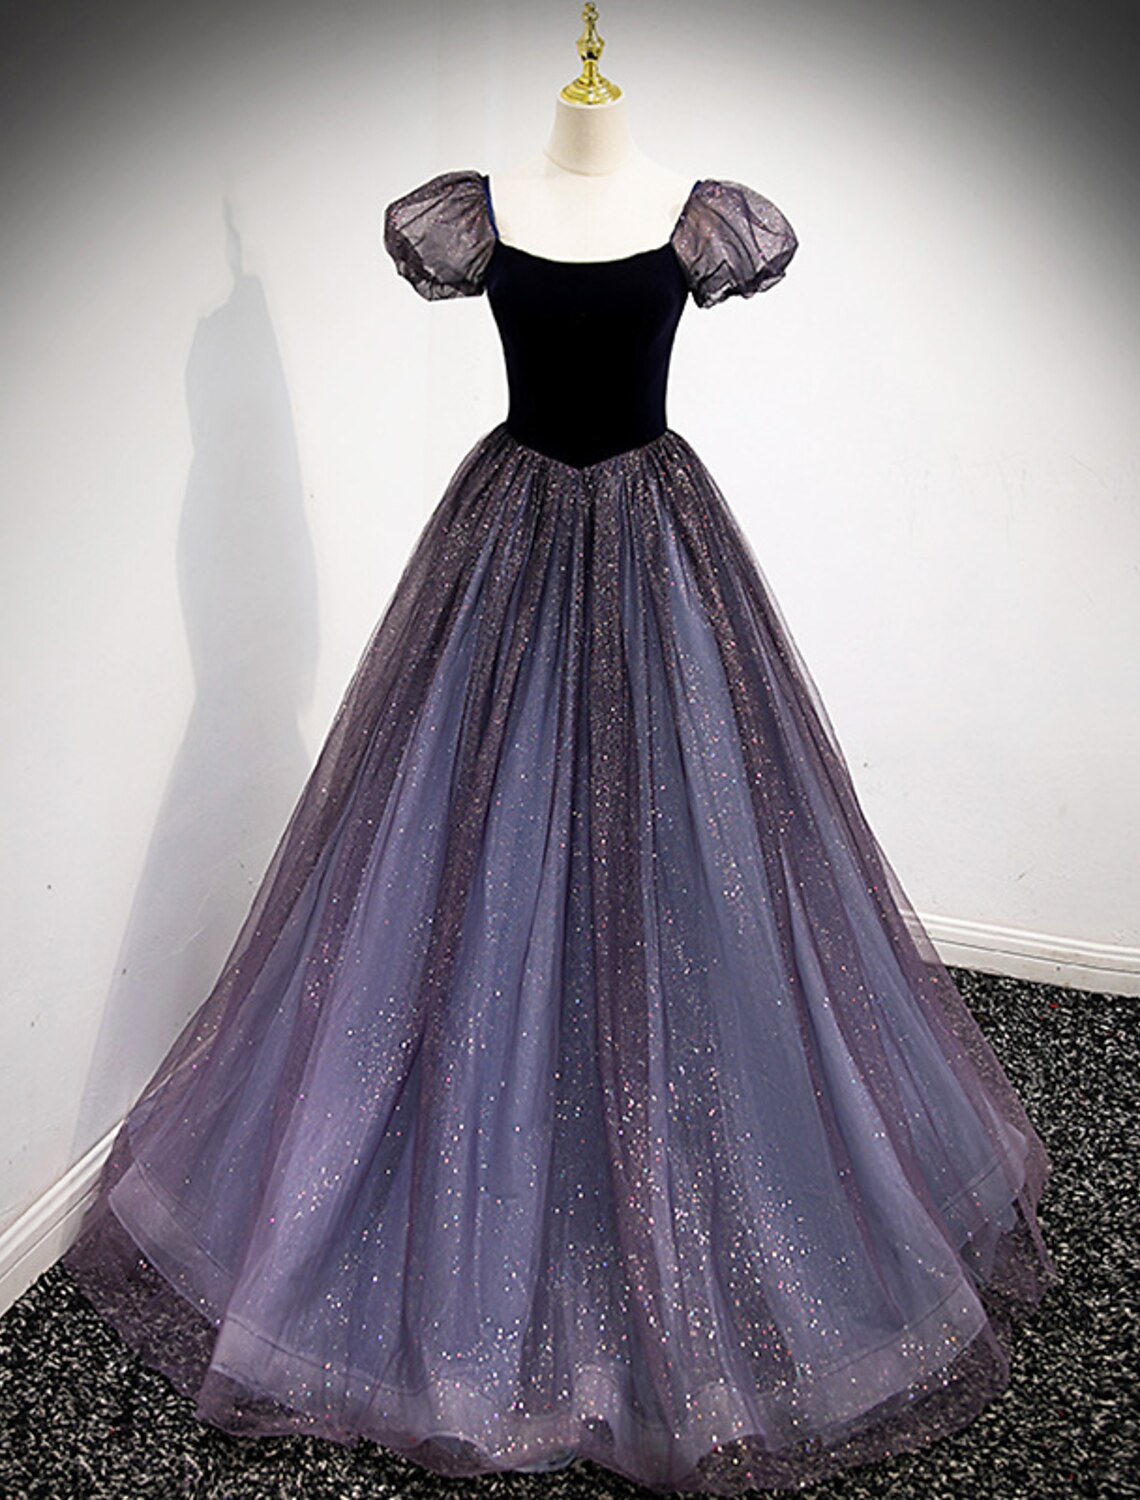 Ball Gown Prom Dresses Cute Dress Engagement Floor Length Short Sleeve Square Neck Tulle with Sequin Splicing